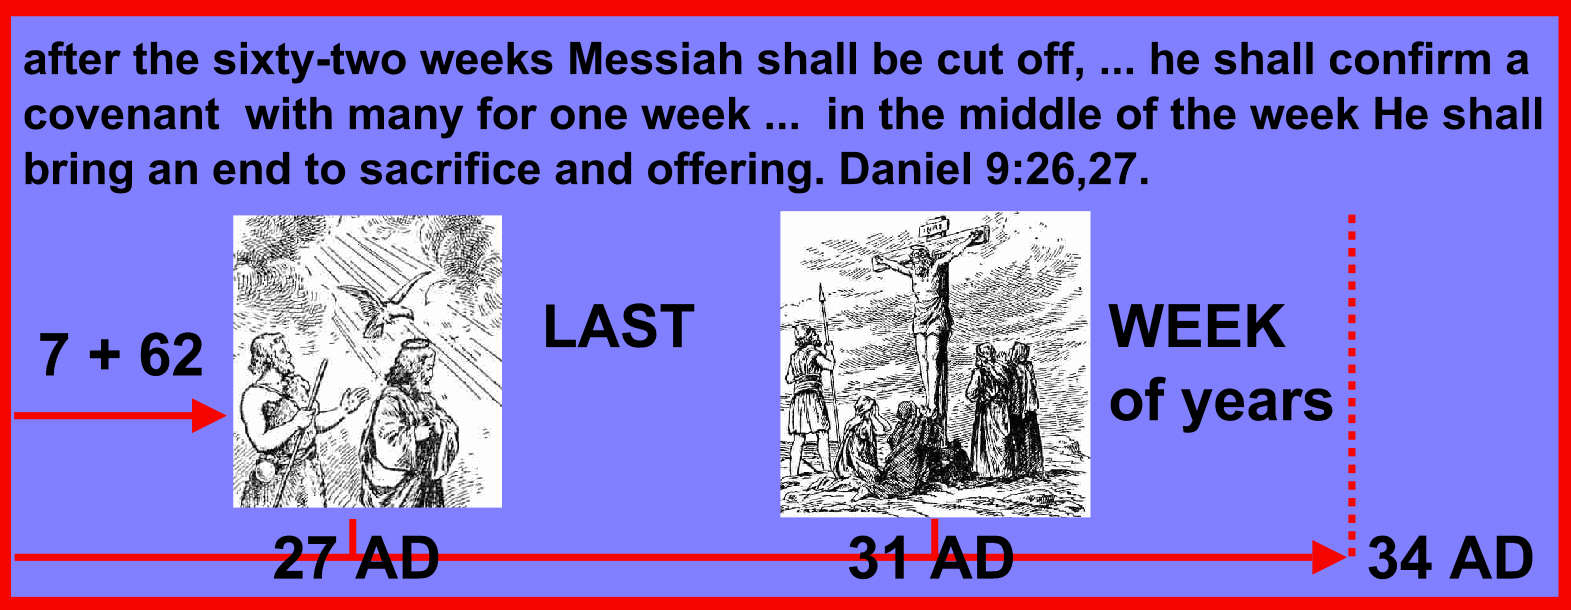 after the sixty-two weeks Messiah shall be cut off, ... he shall confirm a covenant with many for one week ... in the middle of the week He shall bring an end to sacrifice and offering. Daniel 9:26,27.